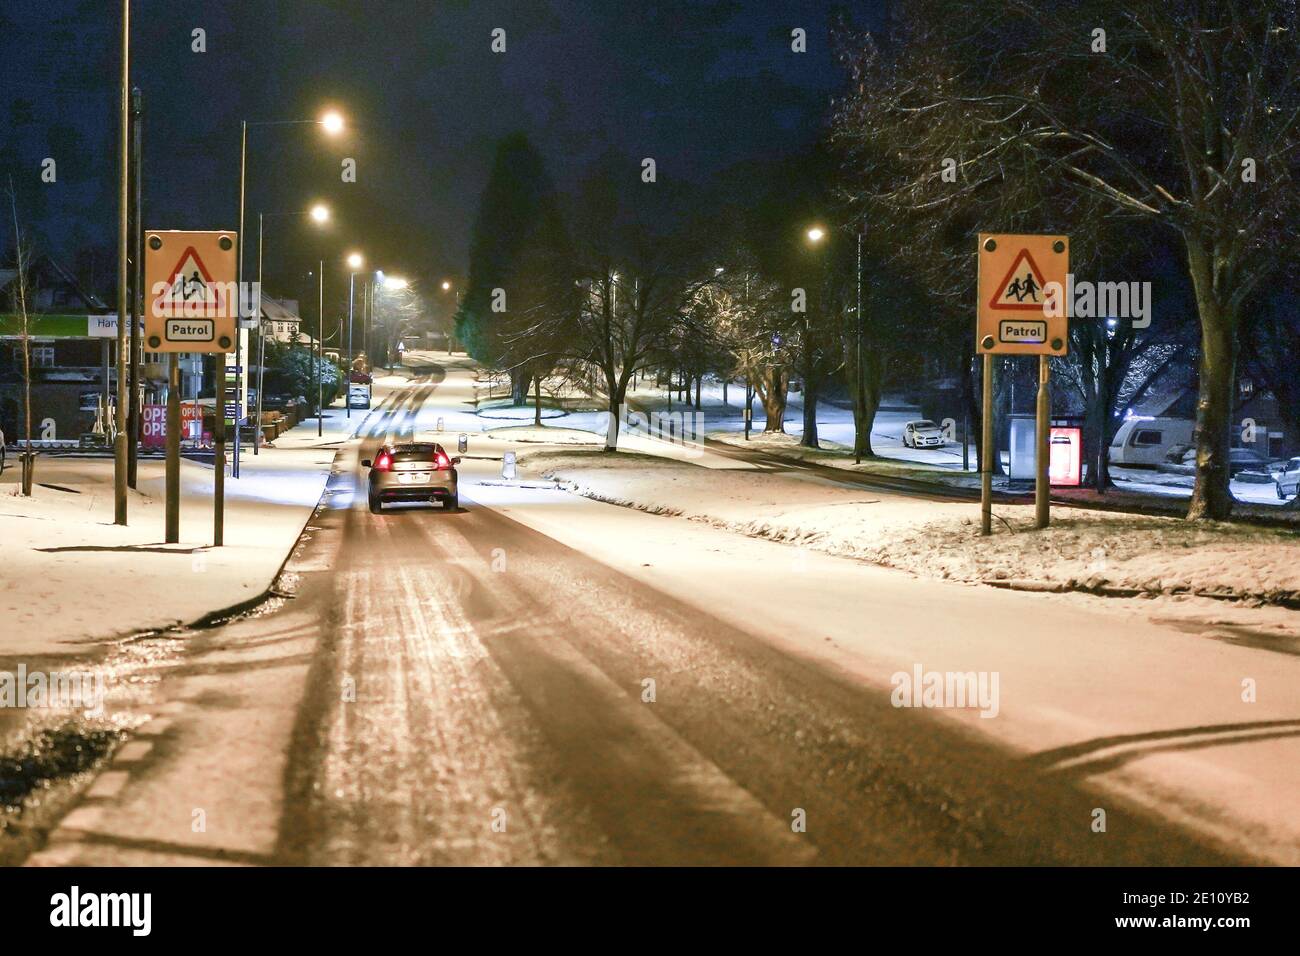 Kidderminster, UK. 2nd January, 2021. UK weather: with daytime temperatures failing to rise much above freezing across Worcestshire and roads already icy, Kidderminster is hit with yet more snow showers. Little traffic can be seen on the snow-covered roads at night.  Credit: Lee Hudson Stock Photo